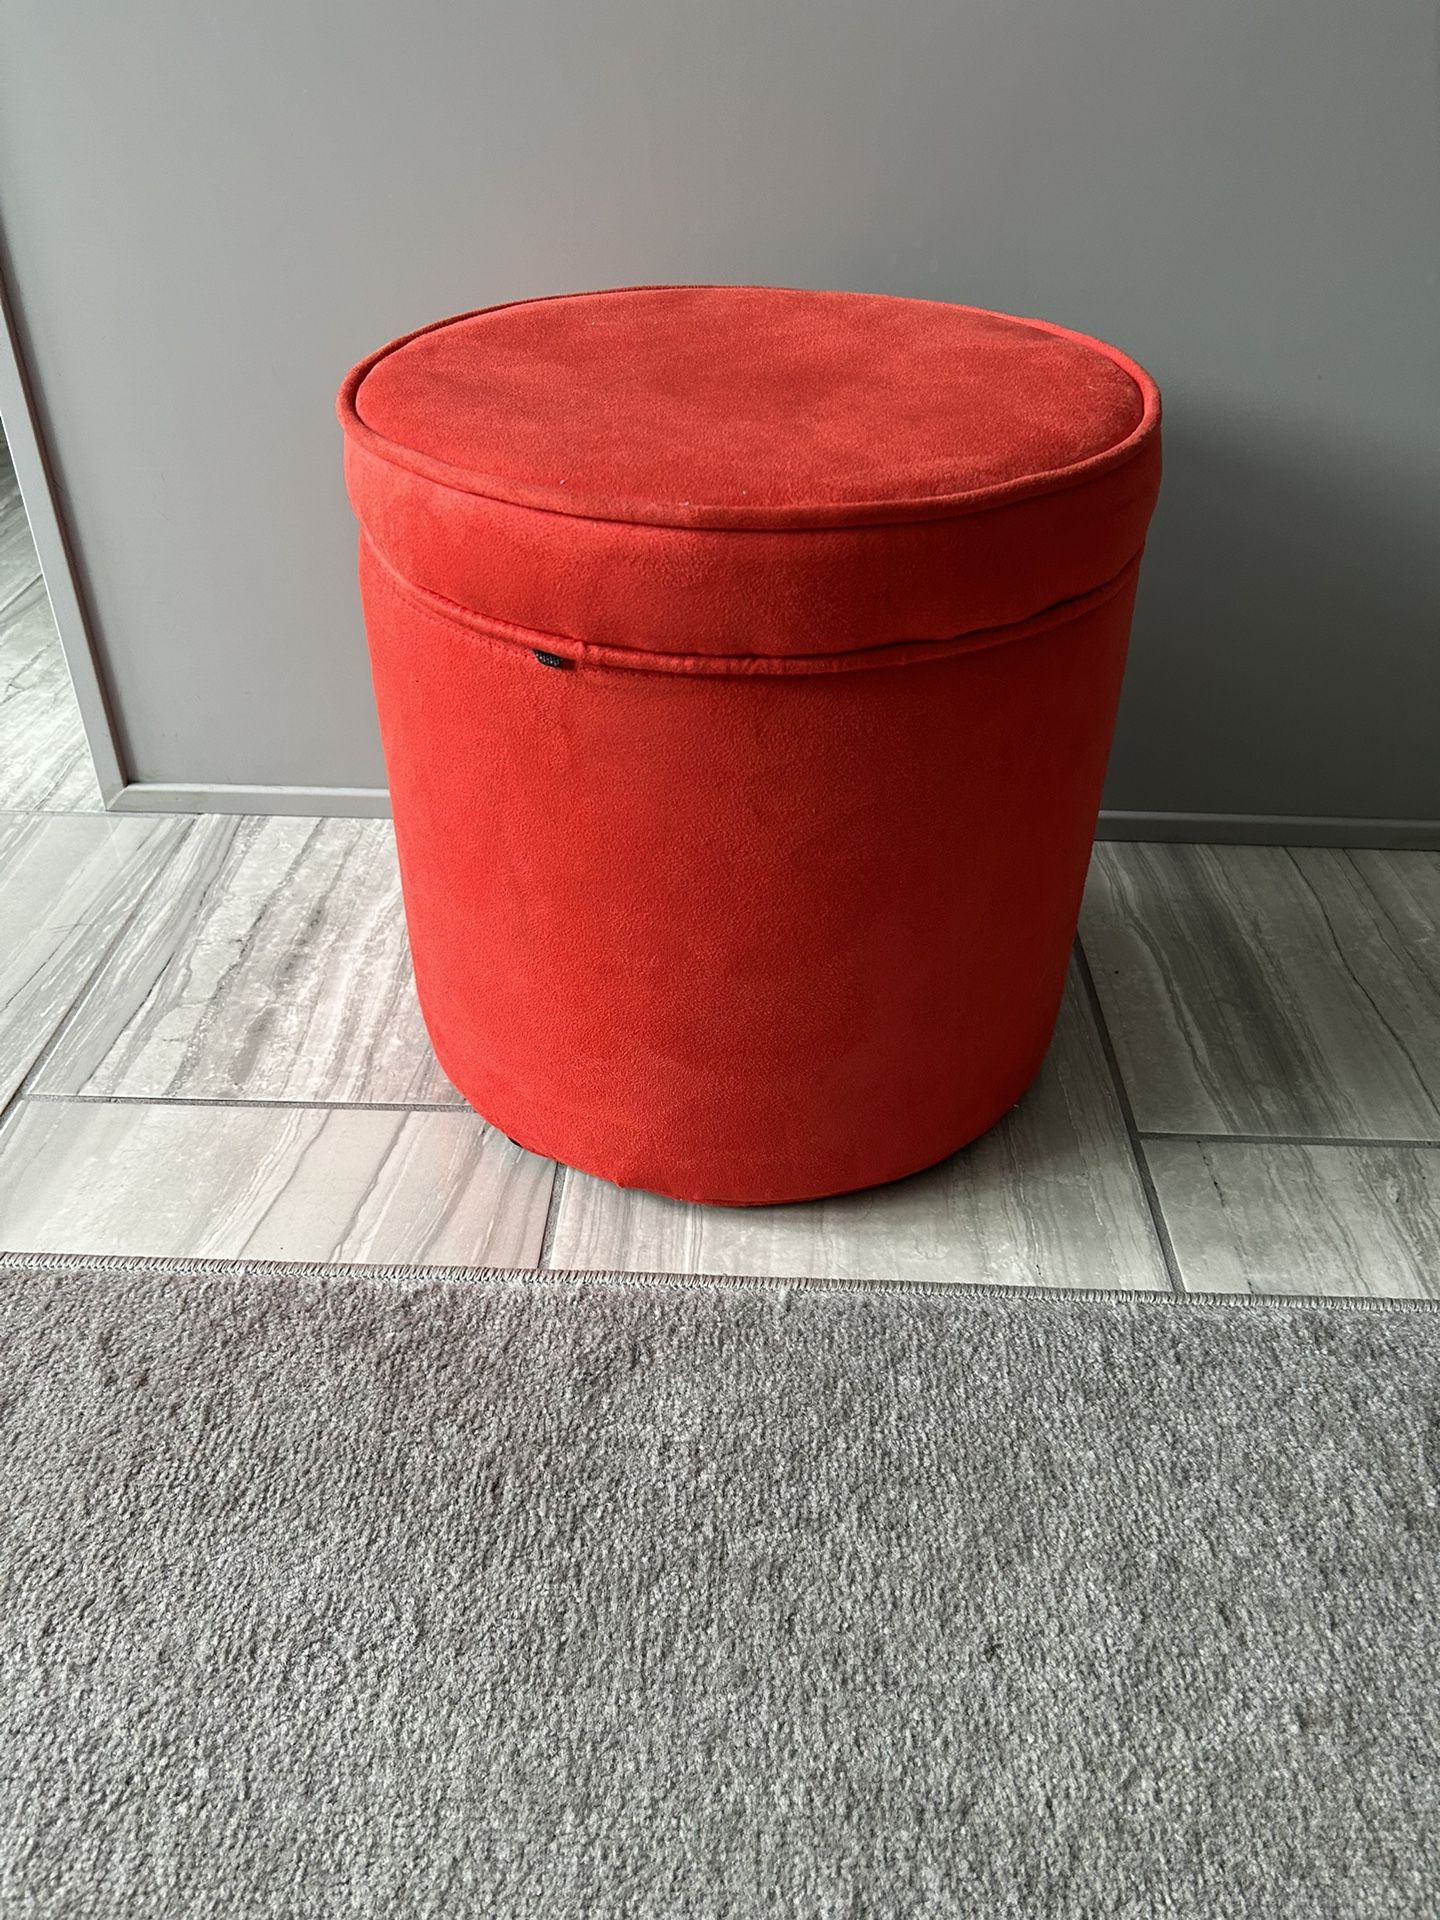 Small Foot Ottoman With Inside Storage 